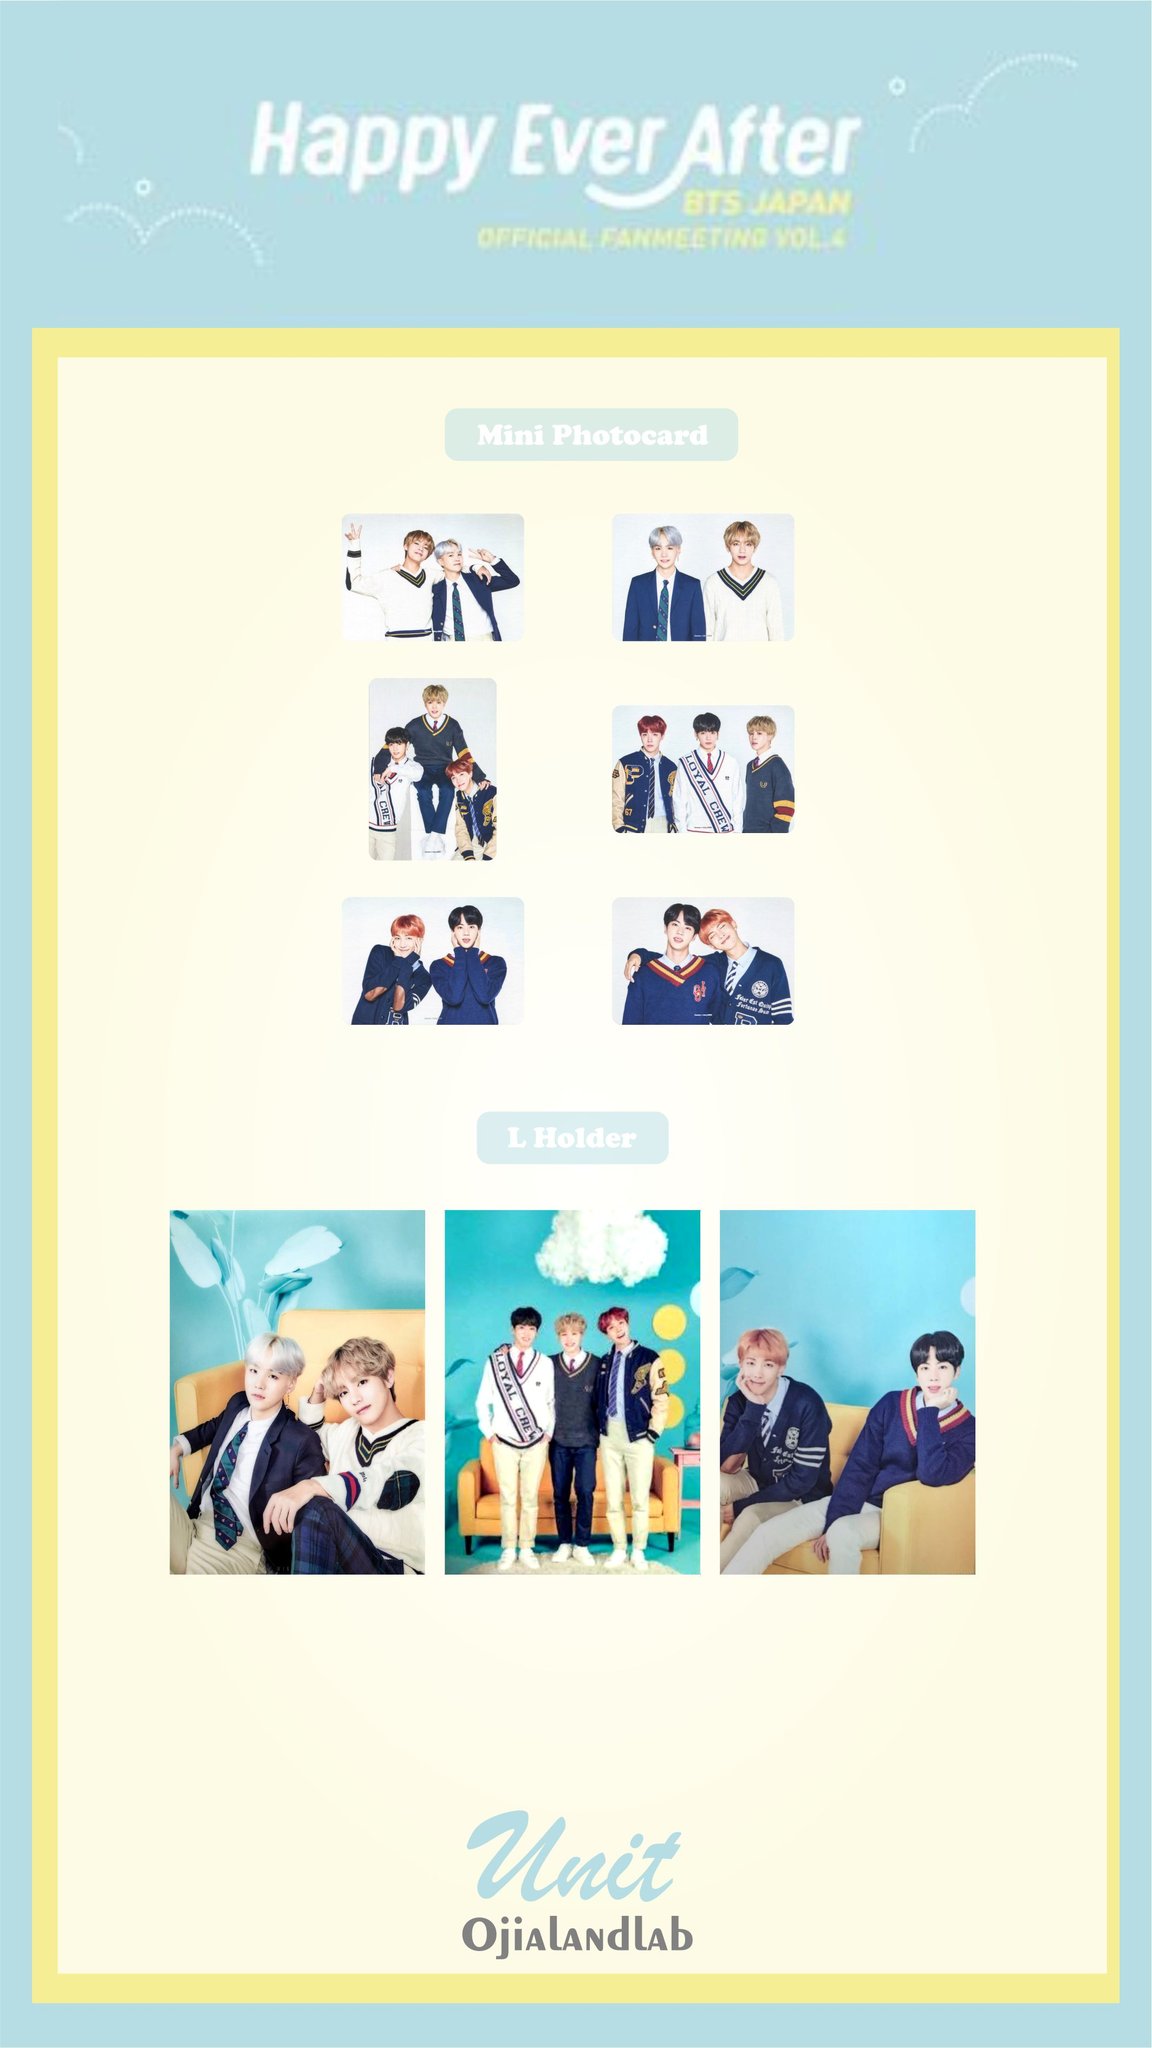 BTS Japan Happy Ever After Fanmeeting Vol. 4 DVD Photocard